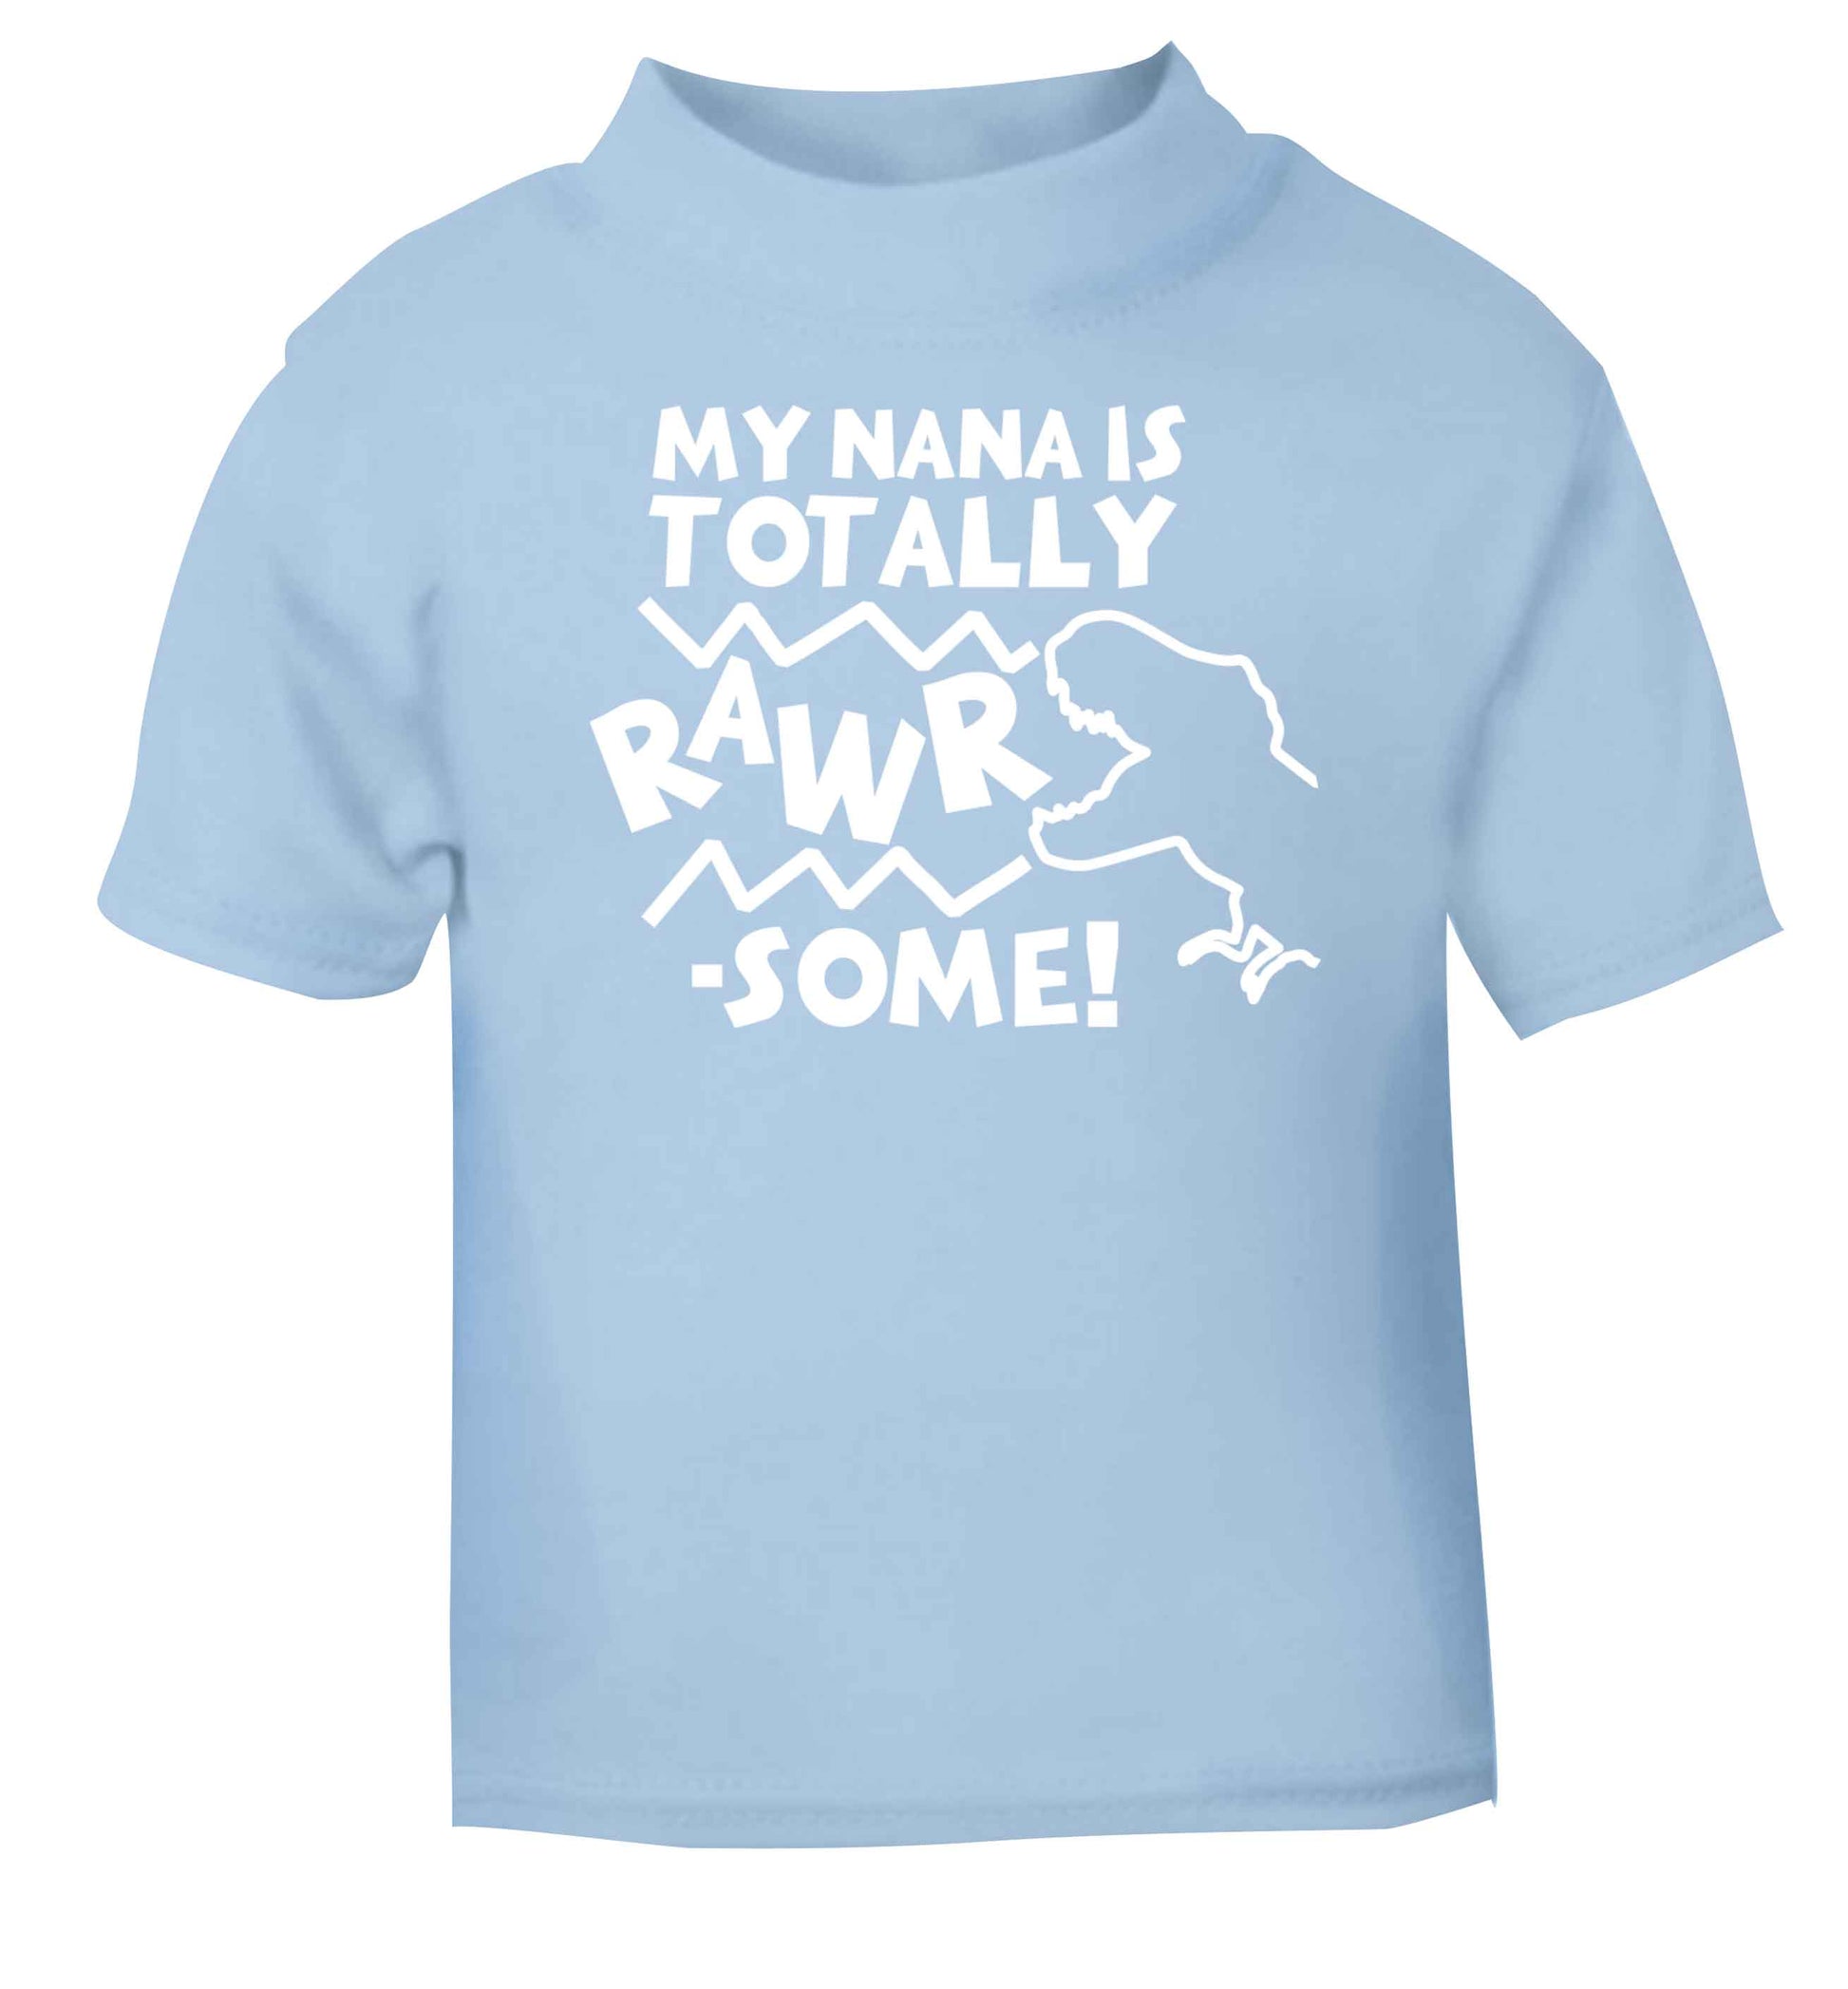 My nana is totally rawrsome light blue baby toddler Tshirt 2 Years